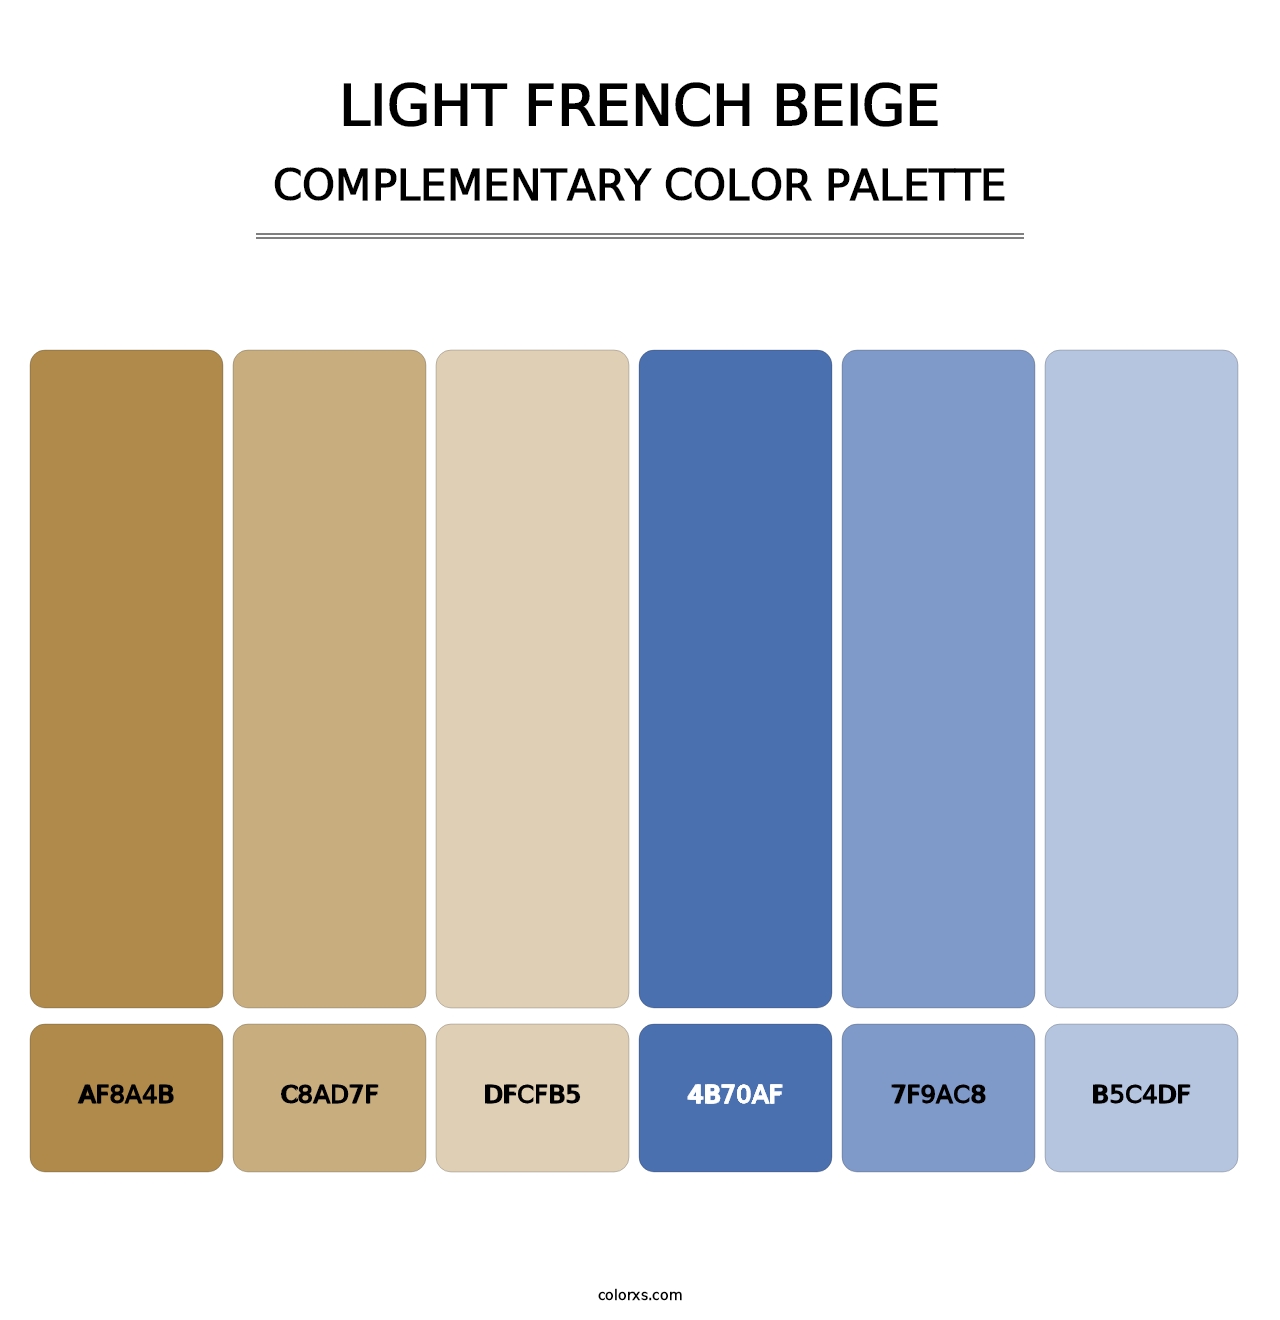 Light French Beige - Complementary Color Palette